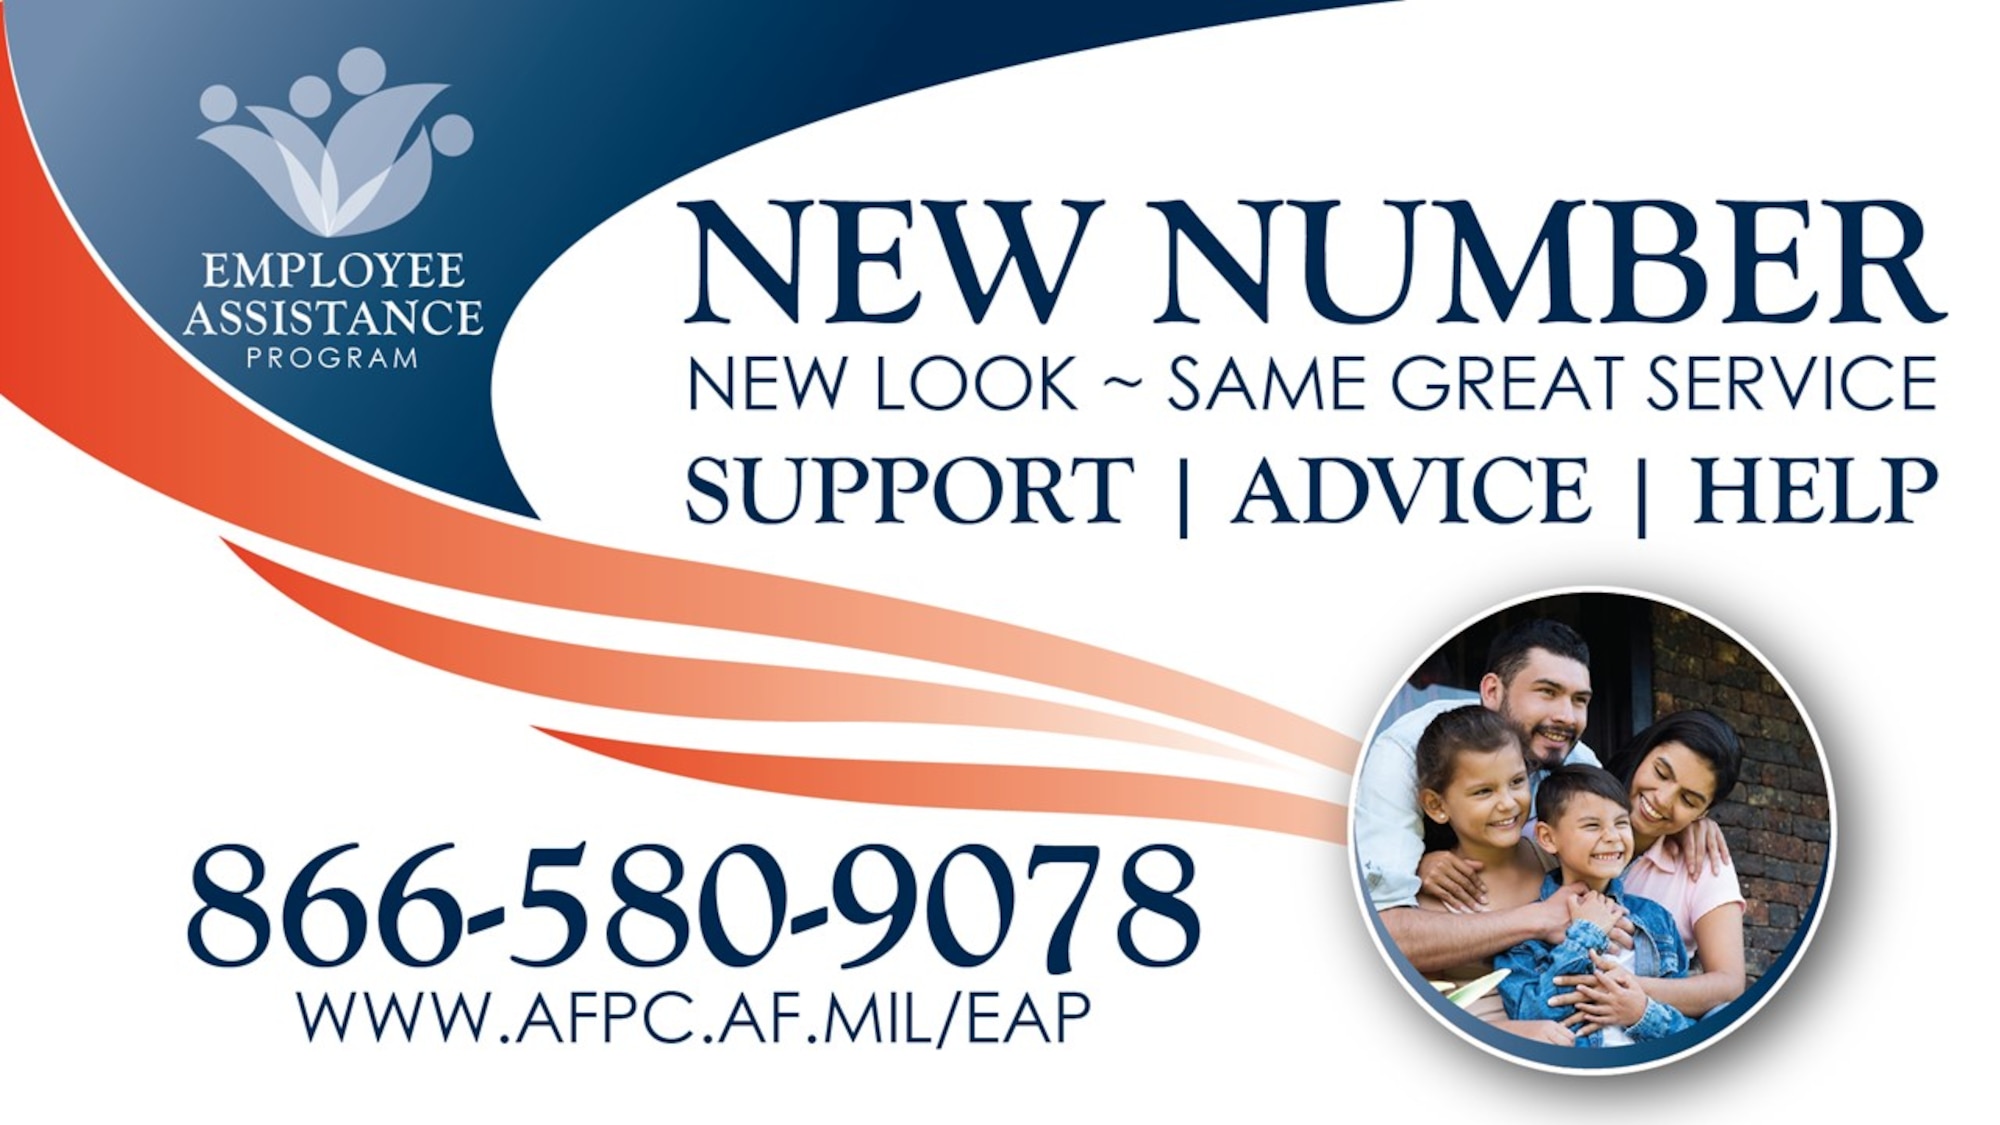 The Air Force Employee Assistance Program will relaunch at 12:01 a.m. Nov. 10, 2019, with a new phone number, 866-580-9078, and new website, www.AFPC.af.mil/EAP. The program will provide the same services and same access to care provided in the past with continued access 24/7 via telephone, website or in-person. (Courtesy graphic)